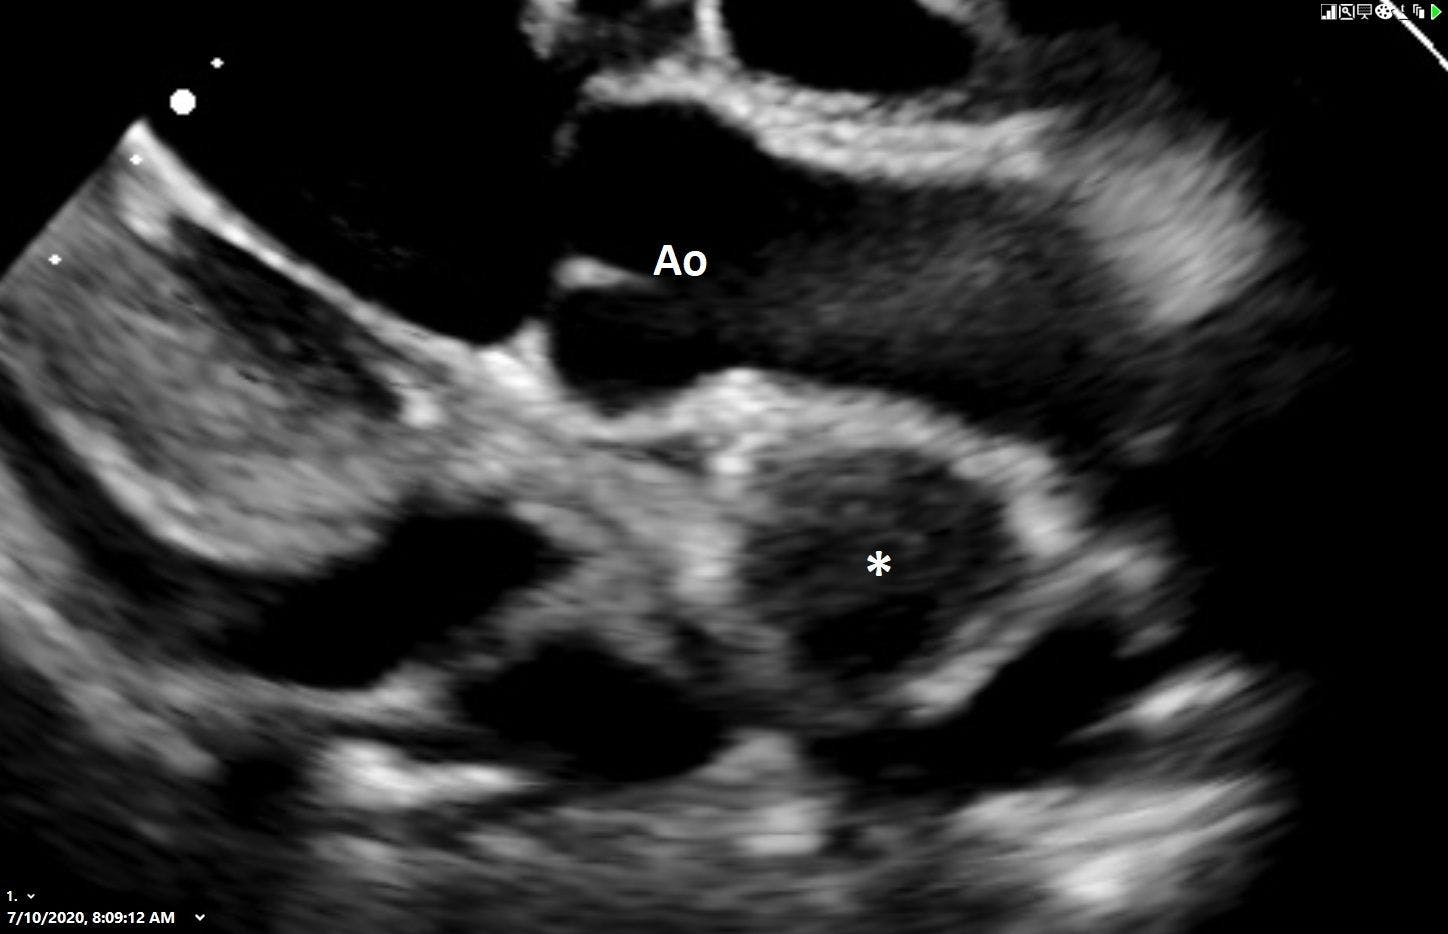 Figure 3. Left intercostal long-axis view depicting the left ventricular outflow tract. A well-demarcated, homogeneous, soft tissue mass (asterisk) can be seen along the ascending aorta. The echocardiographic diagnosis in this middle-aged boxer was a heart base tumor. Based on the mass location and patient signalment, the tentative diagnosis was an aortic body tumor (chemodectoma). The differential diagnosis would include an ectopic thyroid carcinoma or adenoma.